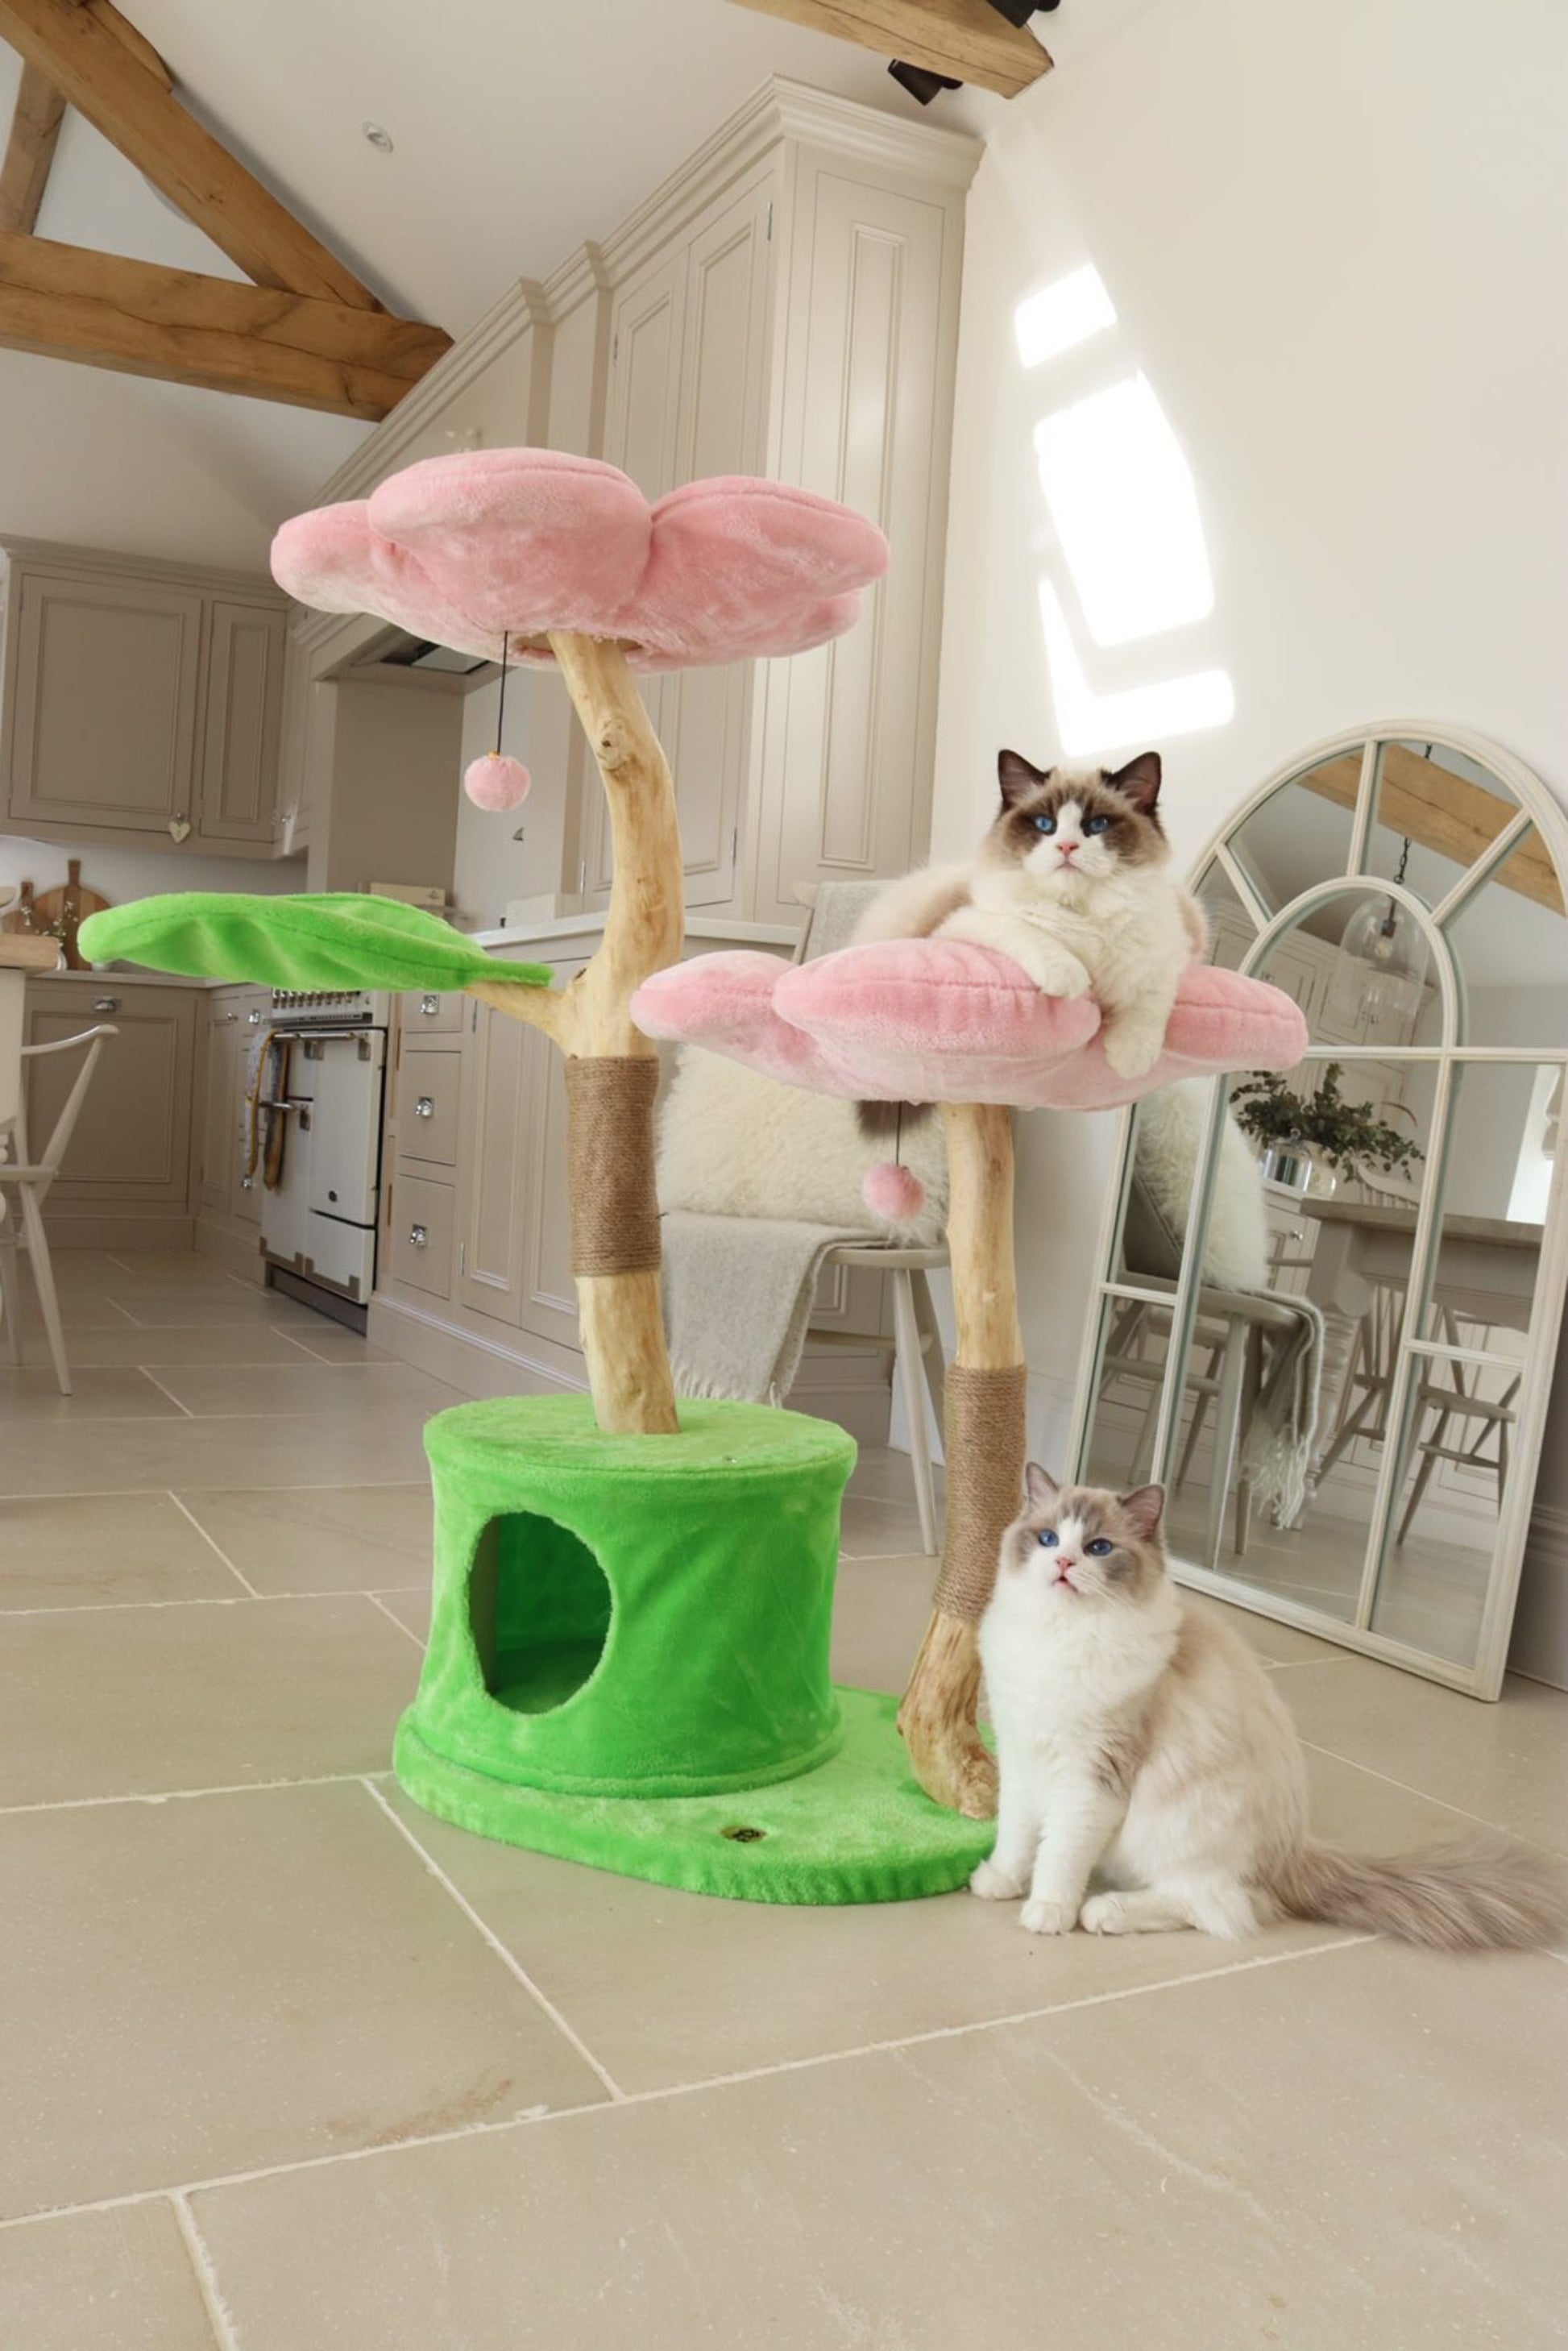 Large Cat Tree Flower Bed - Customize Your Cat Tree